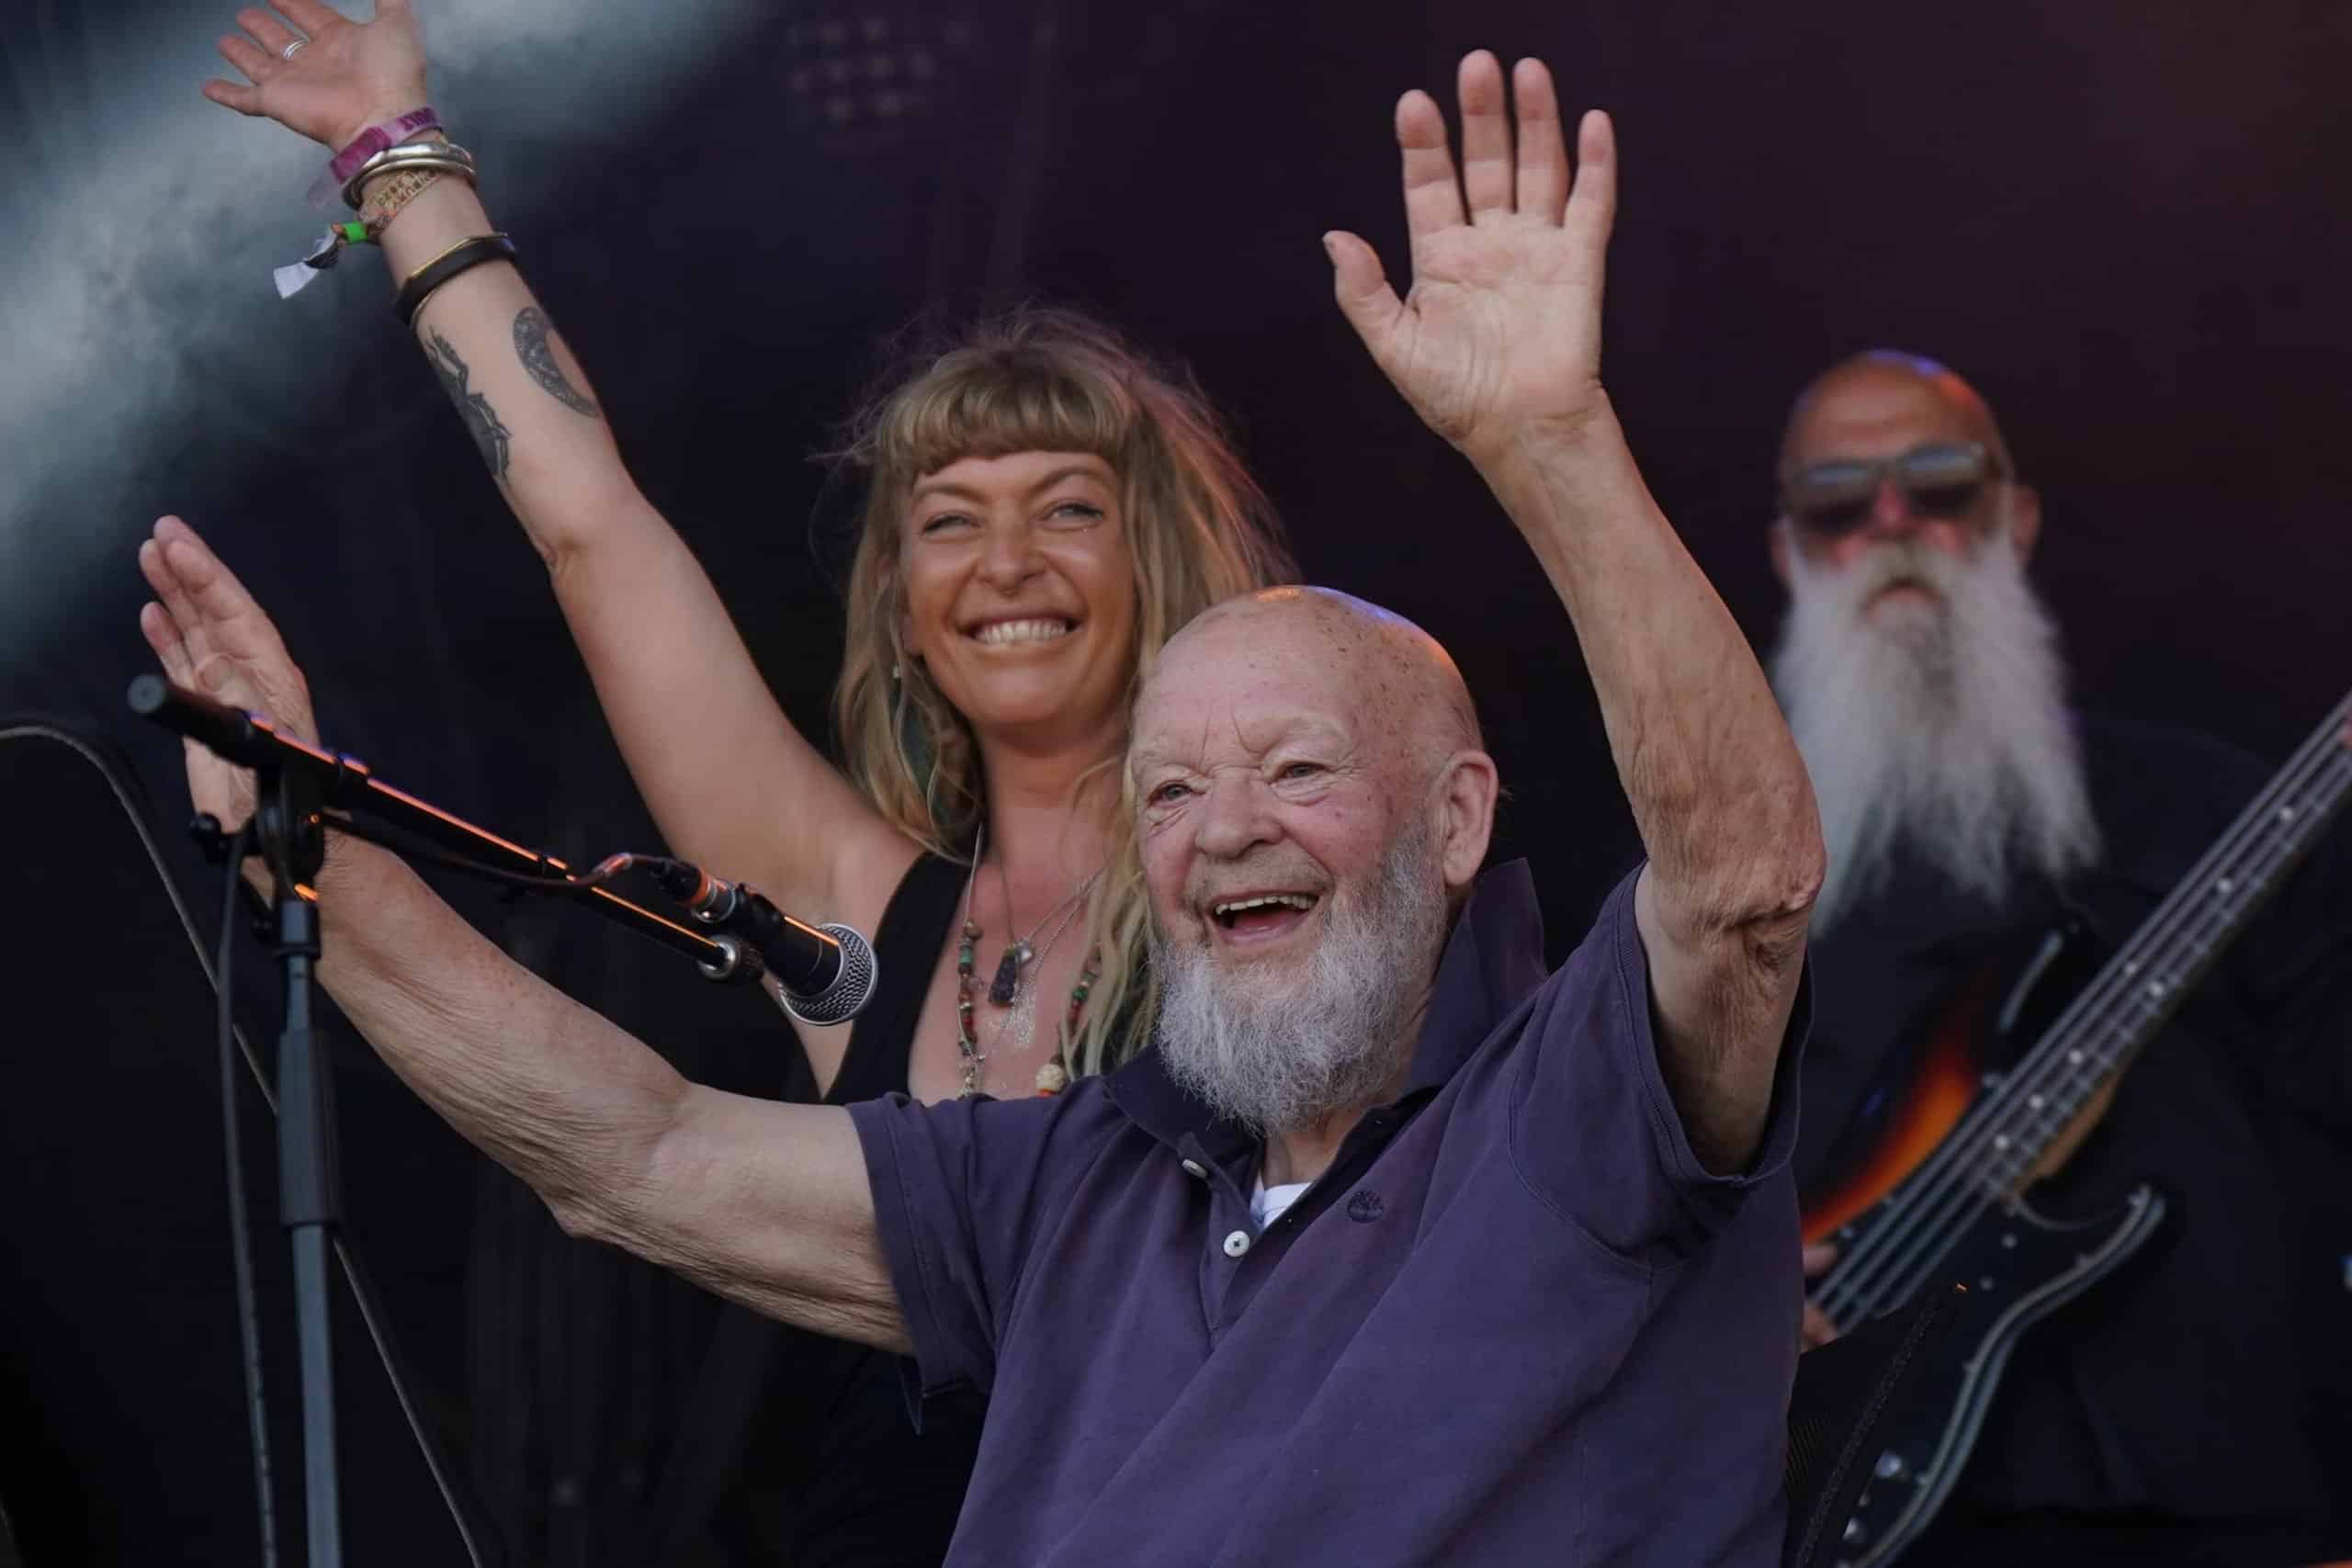 Michael Eavis at the Glastonbury Festival (Credits: The Independent)